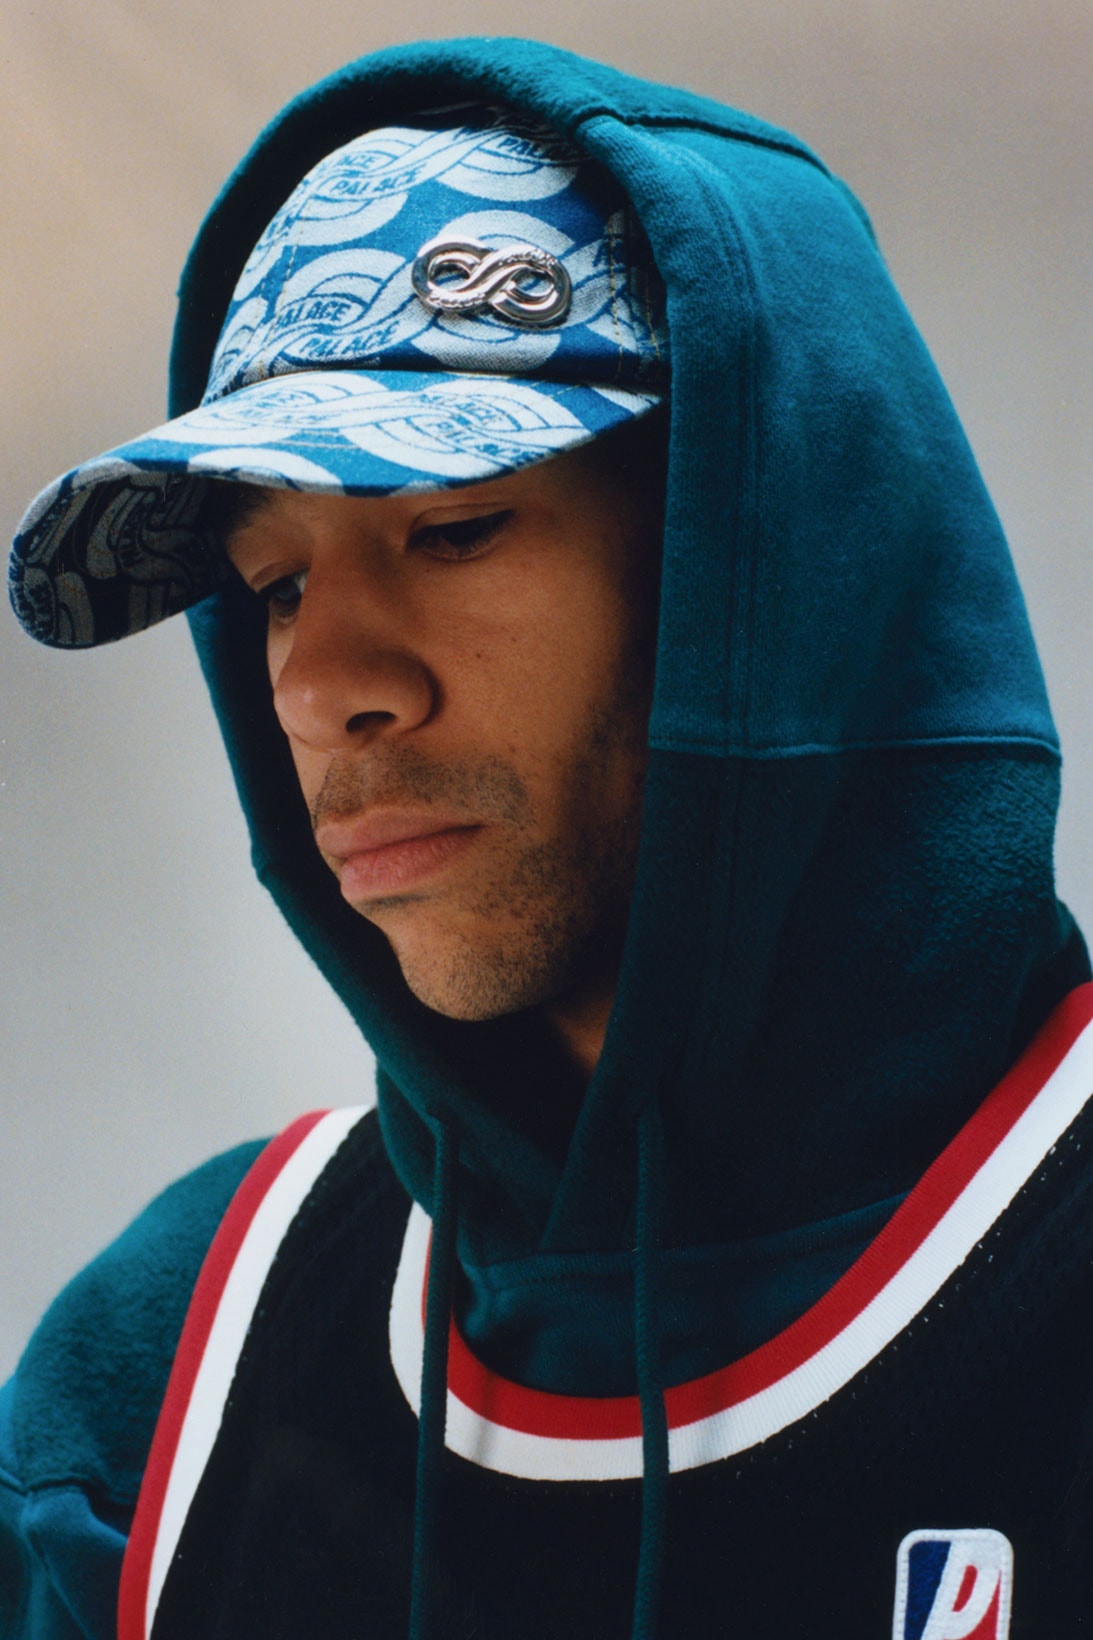 palace skateboards summer 2021 lookbook collection drop cap hat hoodie